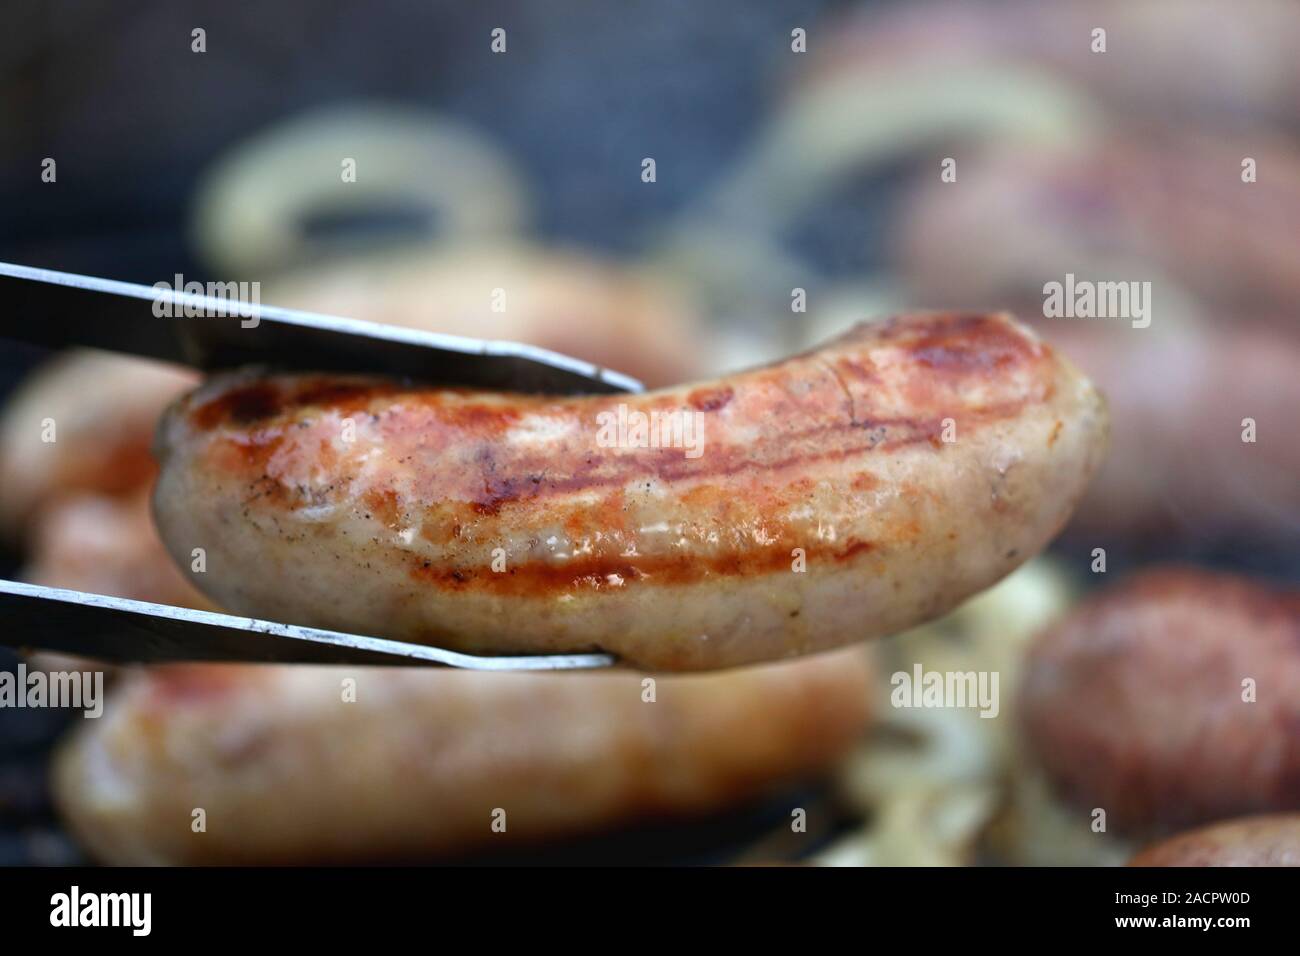 A pork sausage barbecued and barbecue tongs Stock Photo